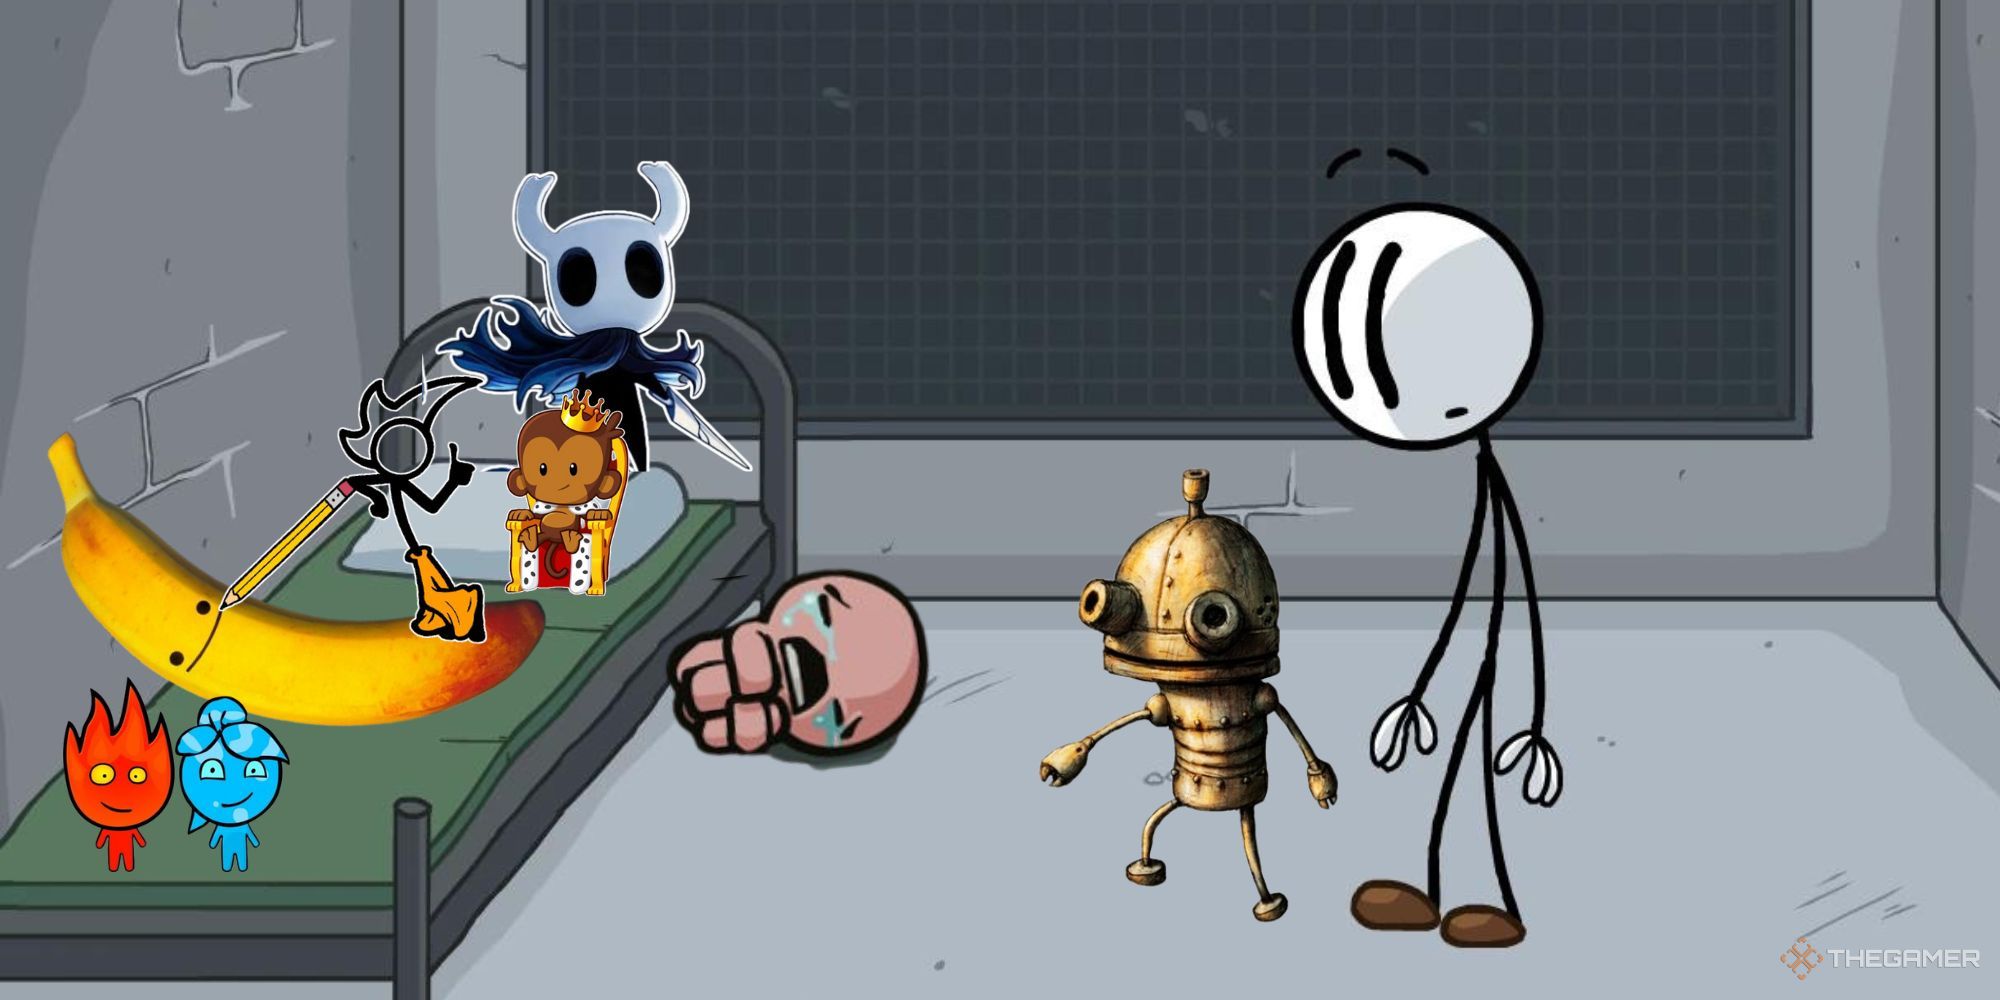 Henry Stickmin in prison, with Josef from Machinarium, Isaac Moriah, Pedro, Fireboy, Watergirl, Hollow Knight, Fancy Pants, and the Bloons monkey chilling around the room